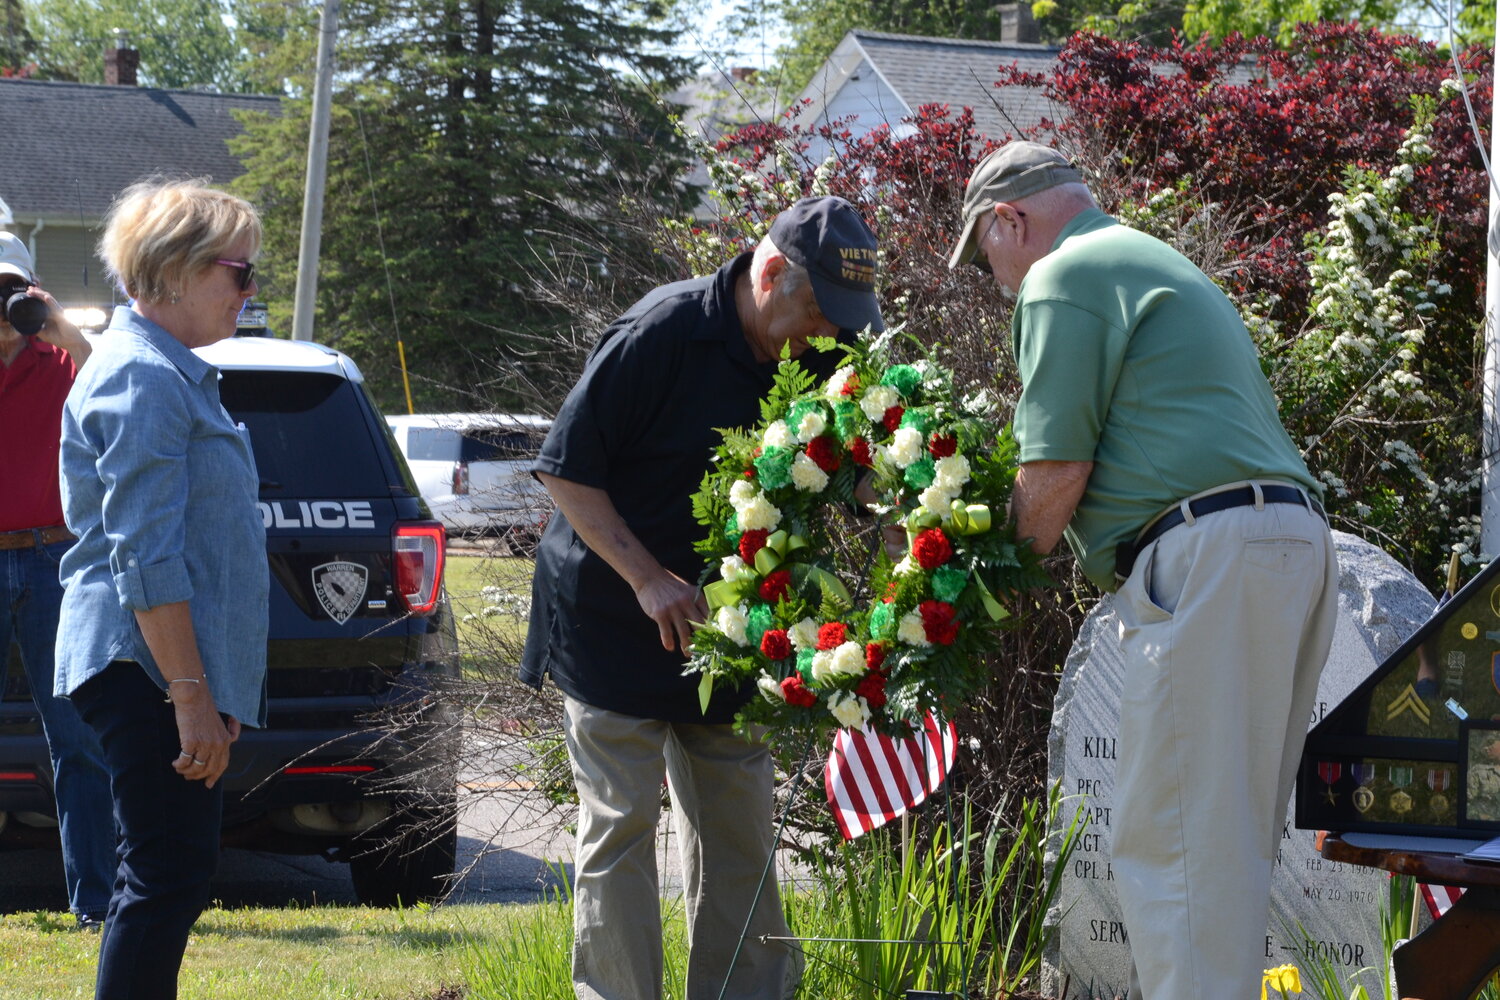 Sandi Siembab looks on as a wreath is placed in honor of her late husband, Stephen “Mike” Siembab, on Sunday morning at the Vietnam Memorial in Warren. The couple was married for 49 years, and their 50th anniversary would be on June 15.